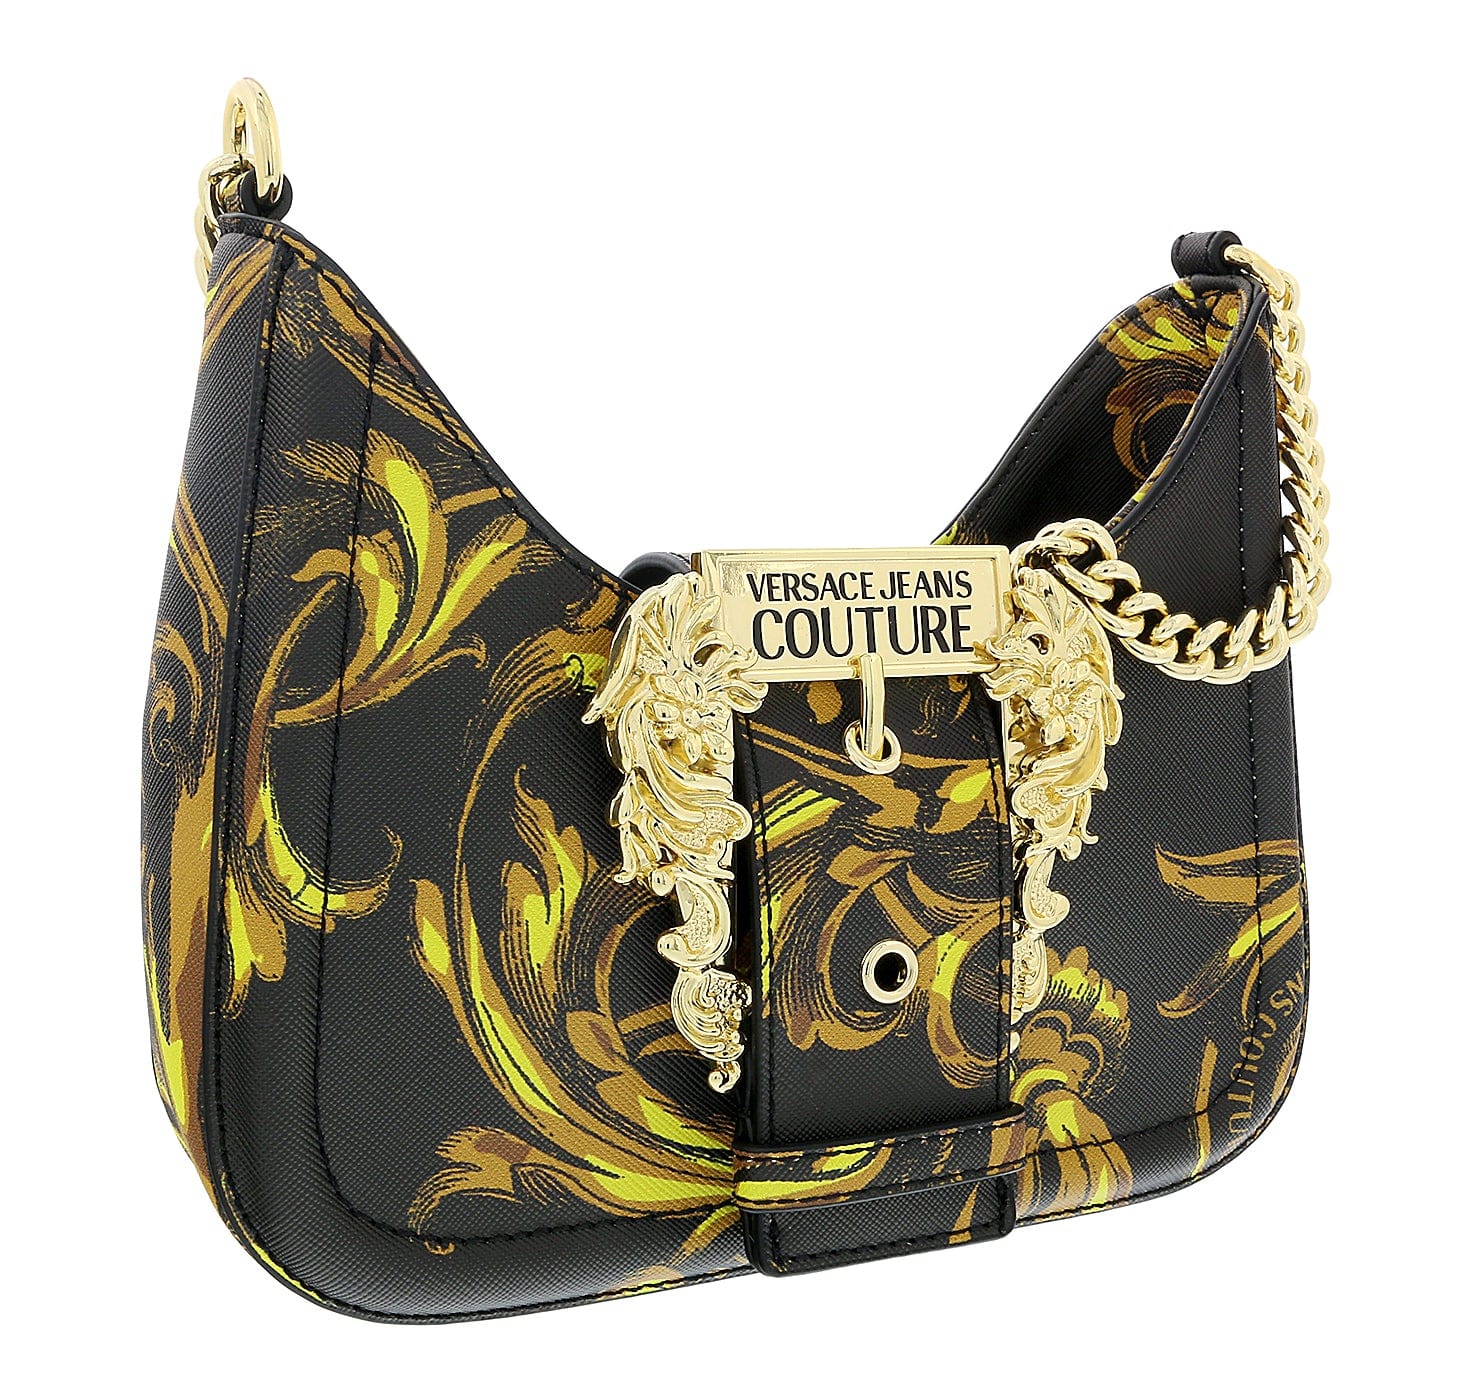 Versace Jeans Couture women's bag in imitation leather with pearl print  Black-Gold